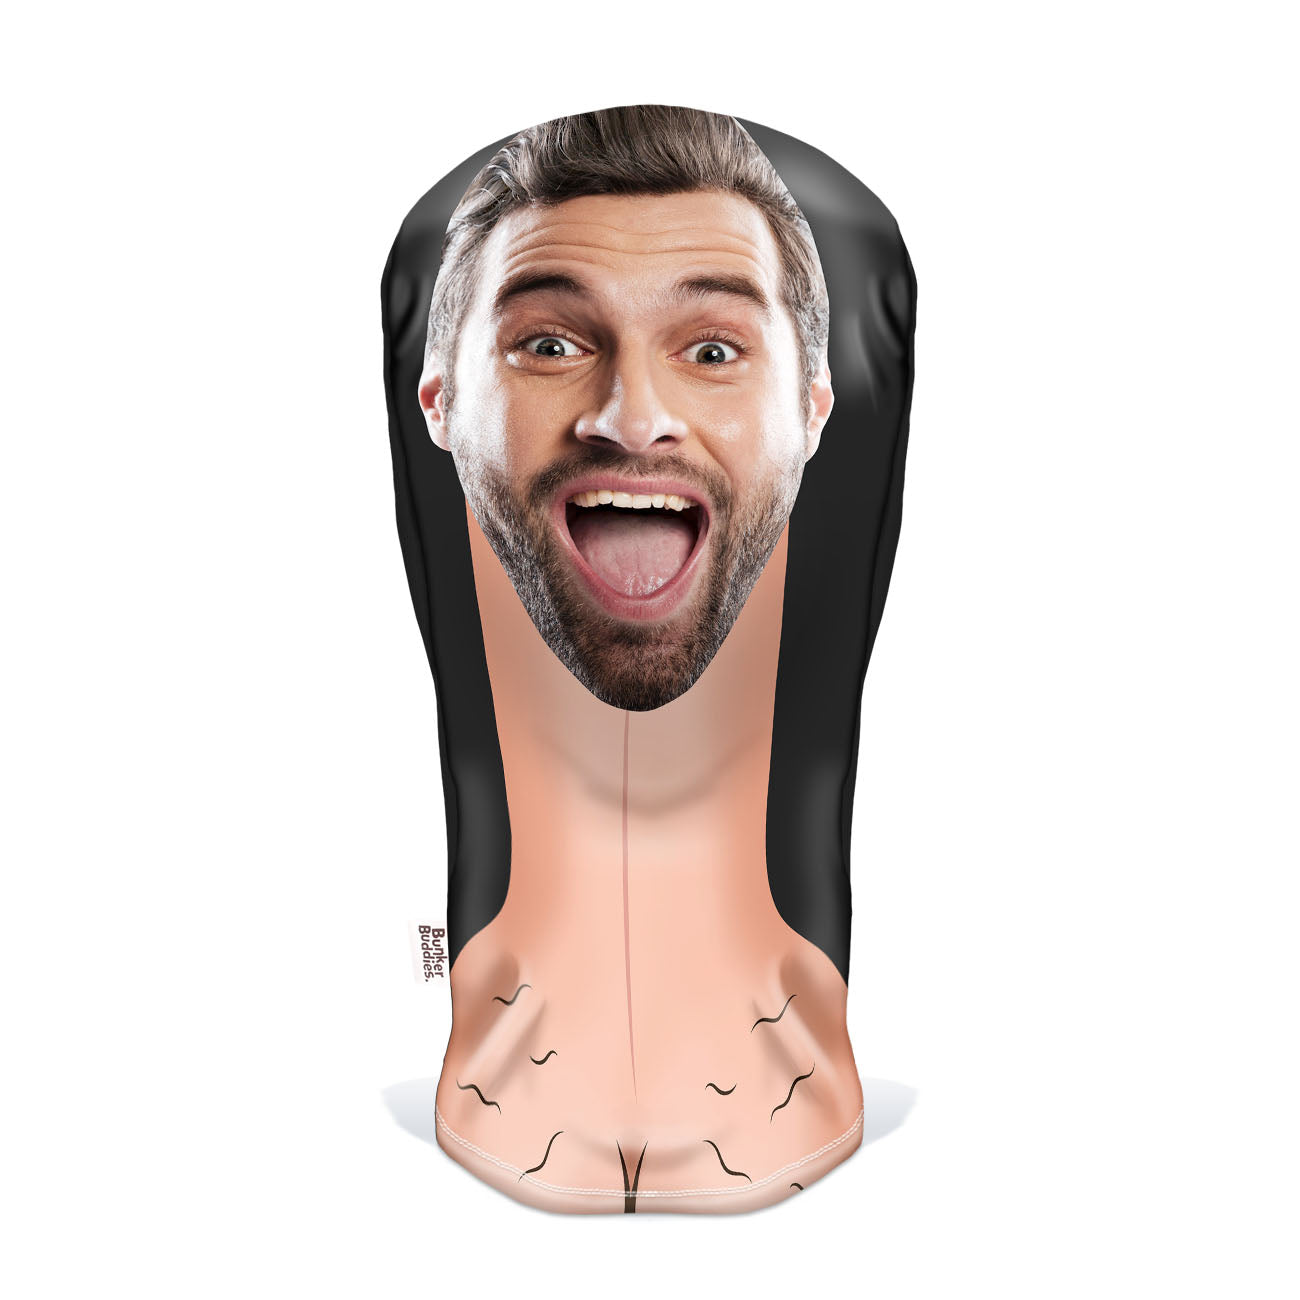 D*ckhead Personalised Golf Head Cover